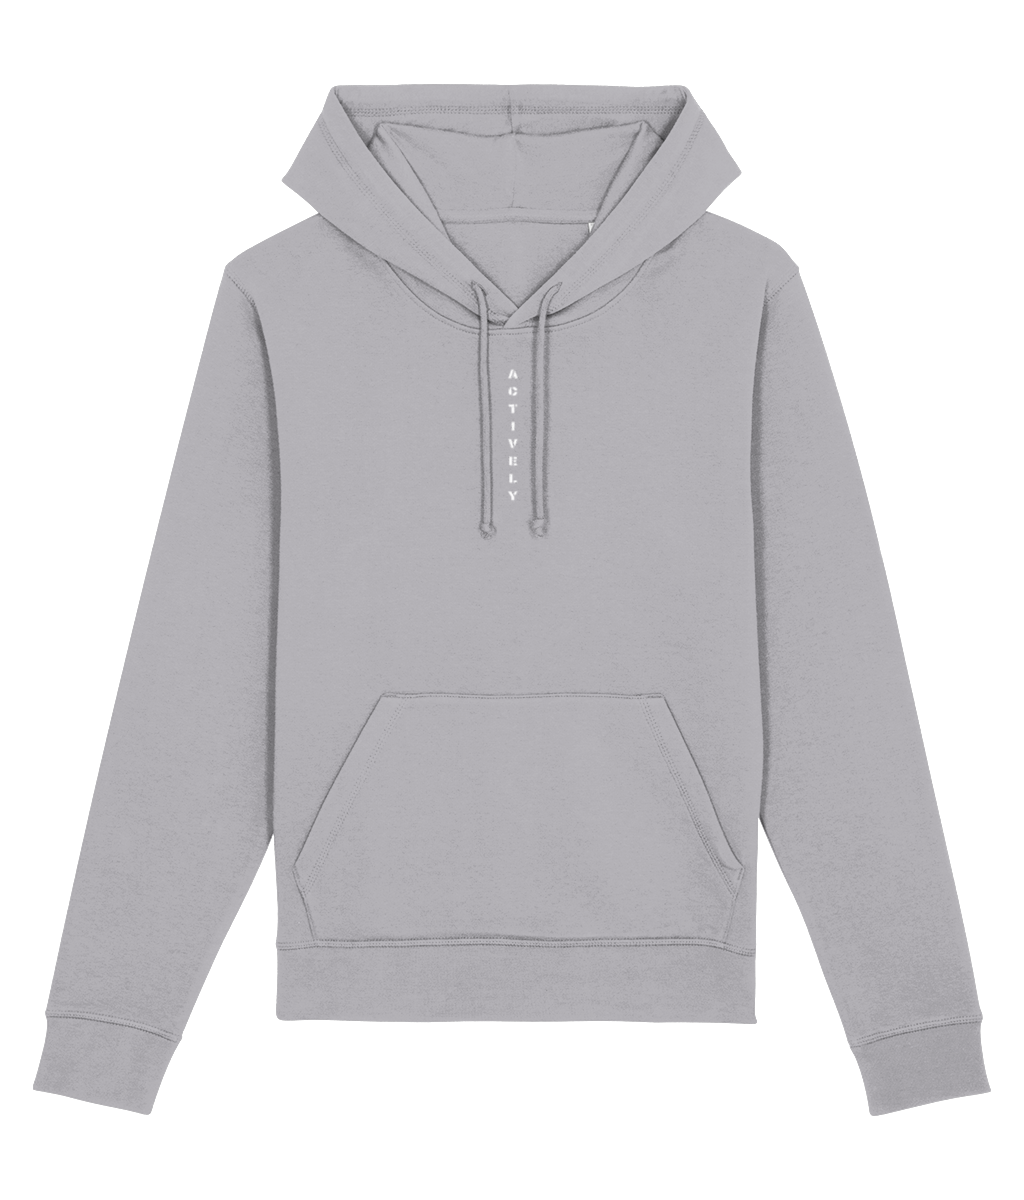 ACTIVELY - The Essential Unisex Hoodie